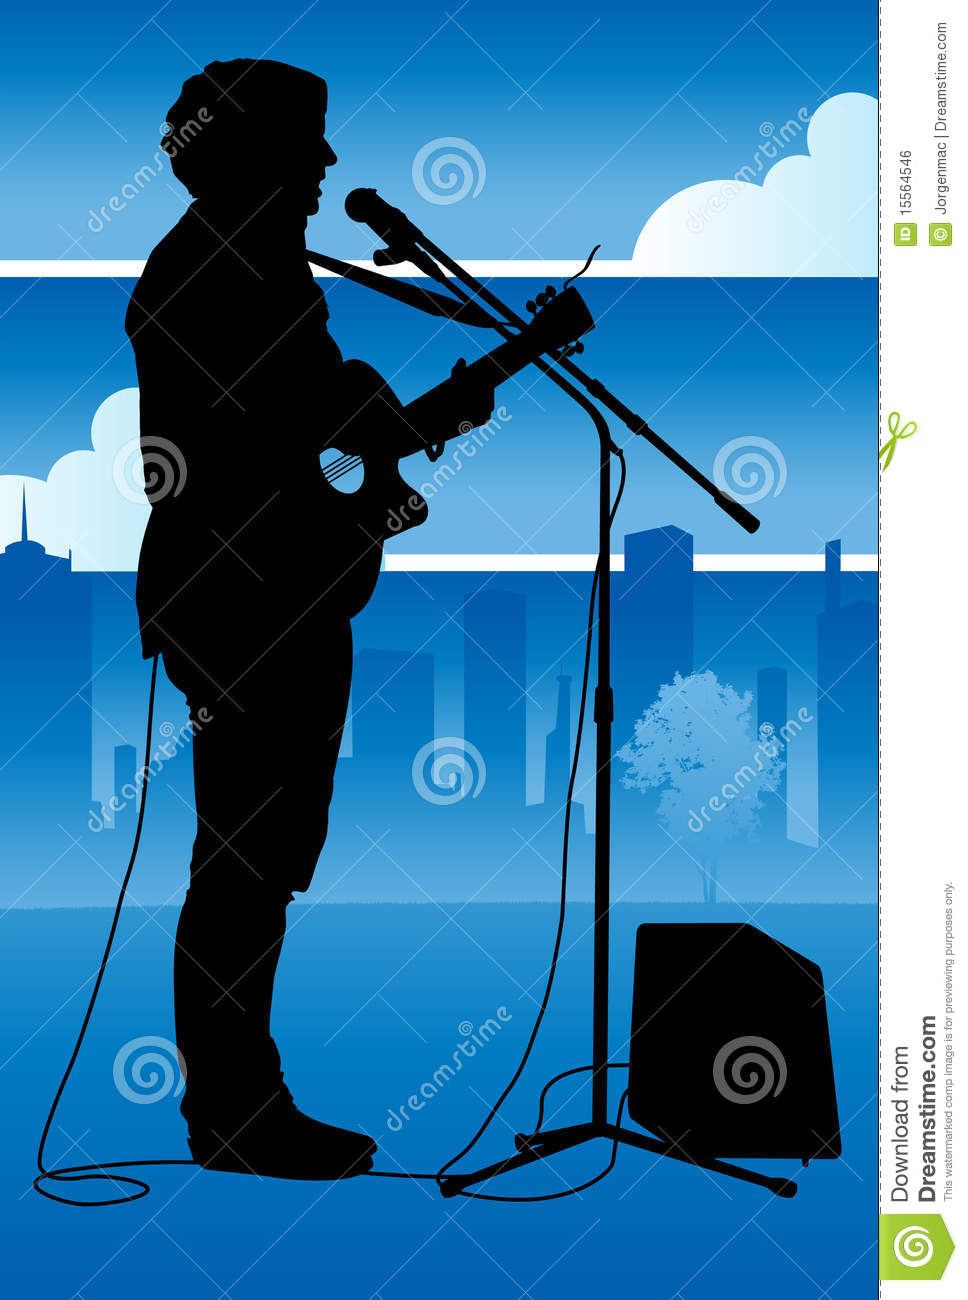 Female Musician Busking In The City Royalty Free Stock Image   Image